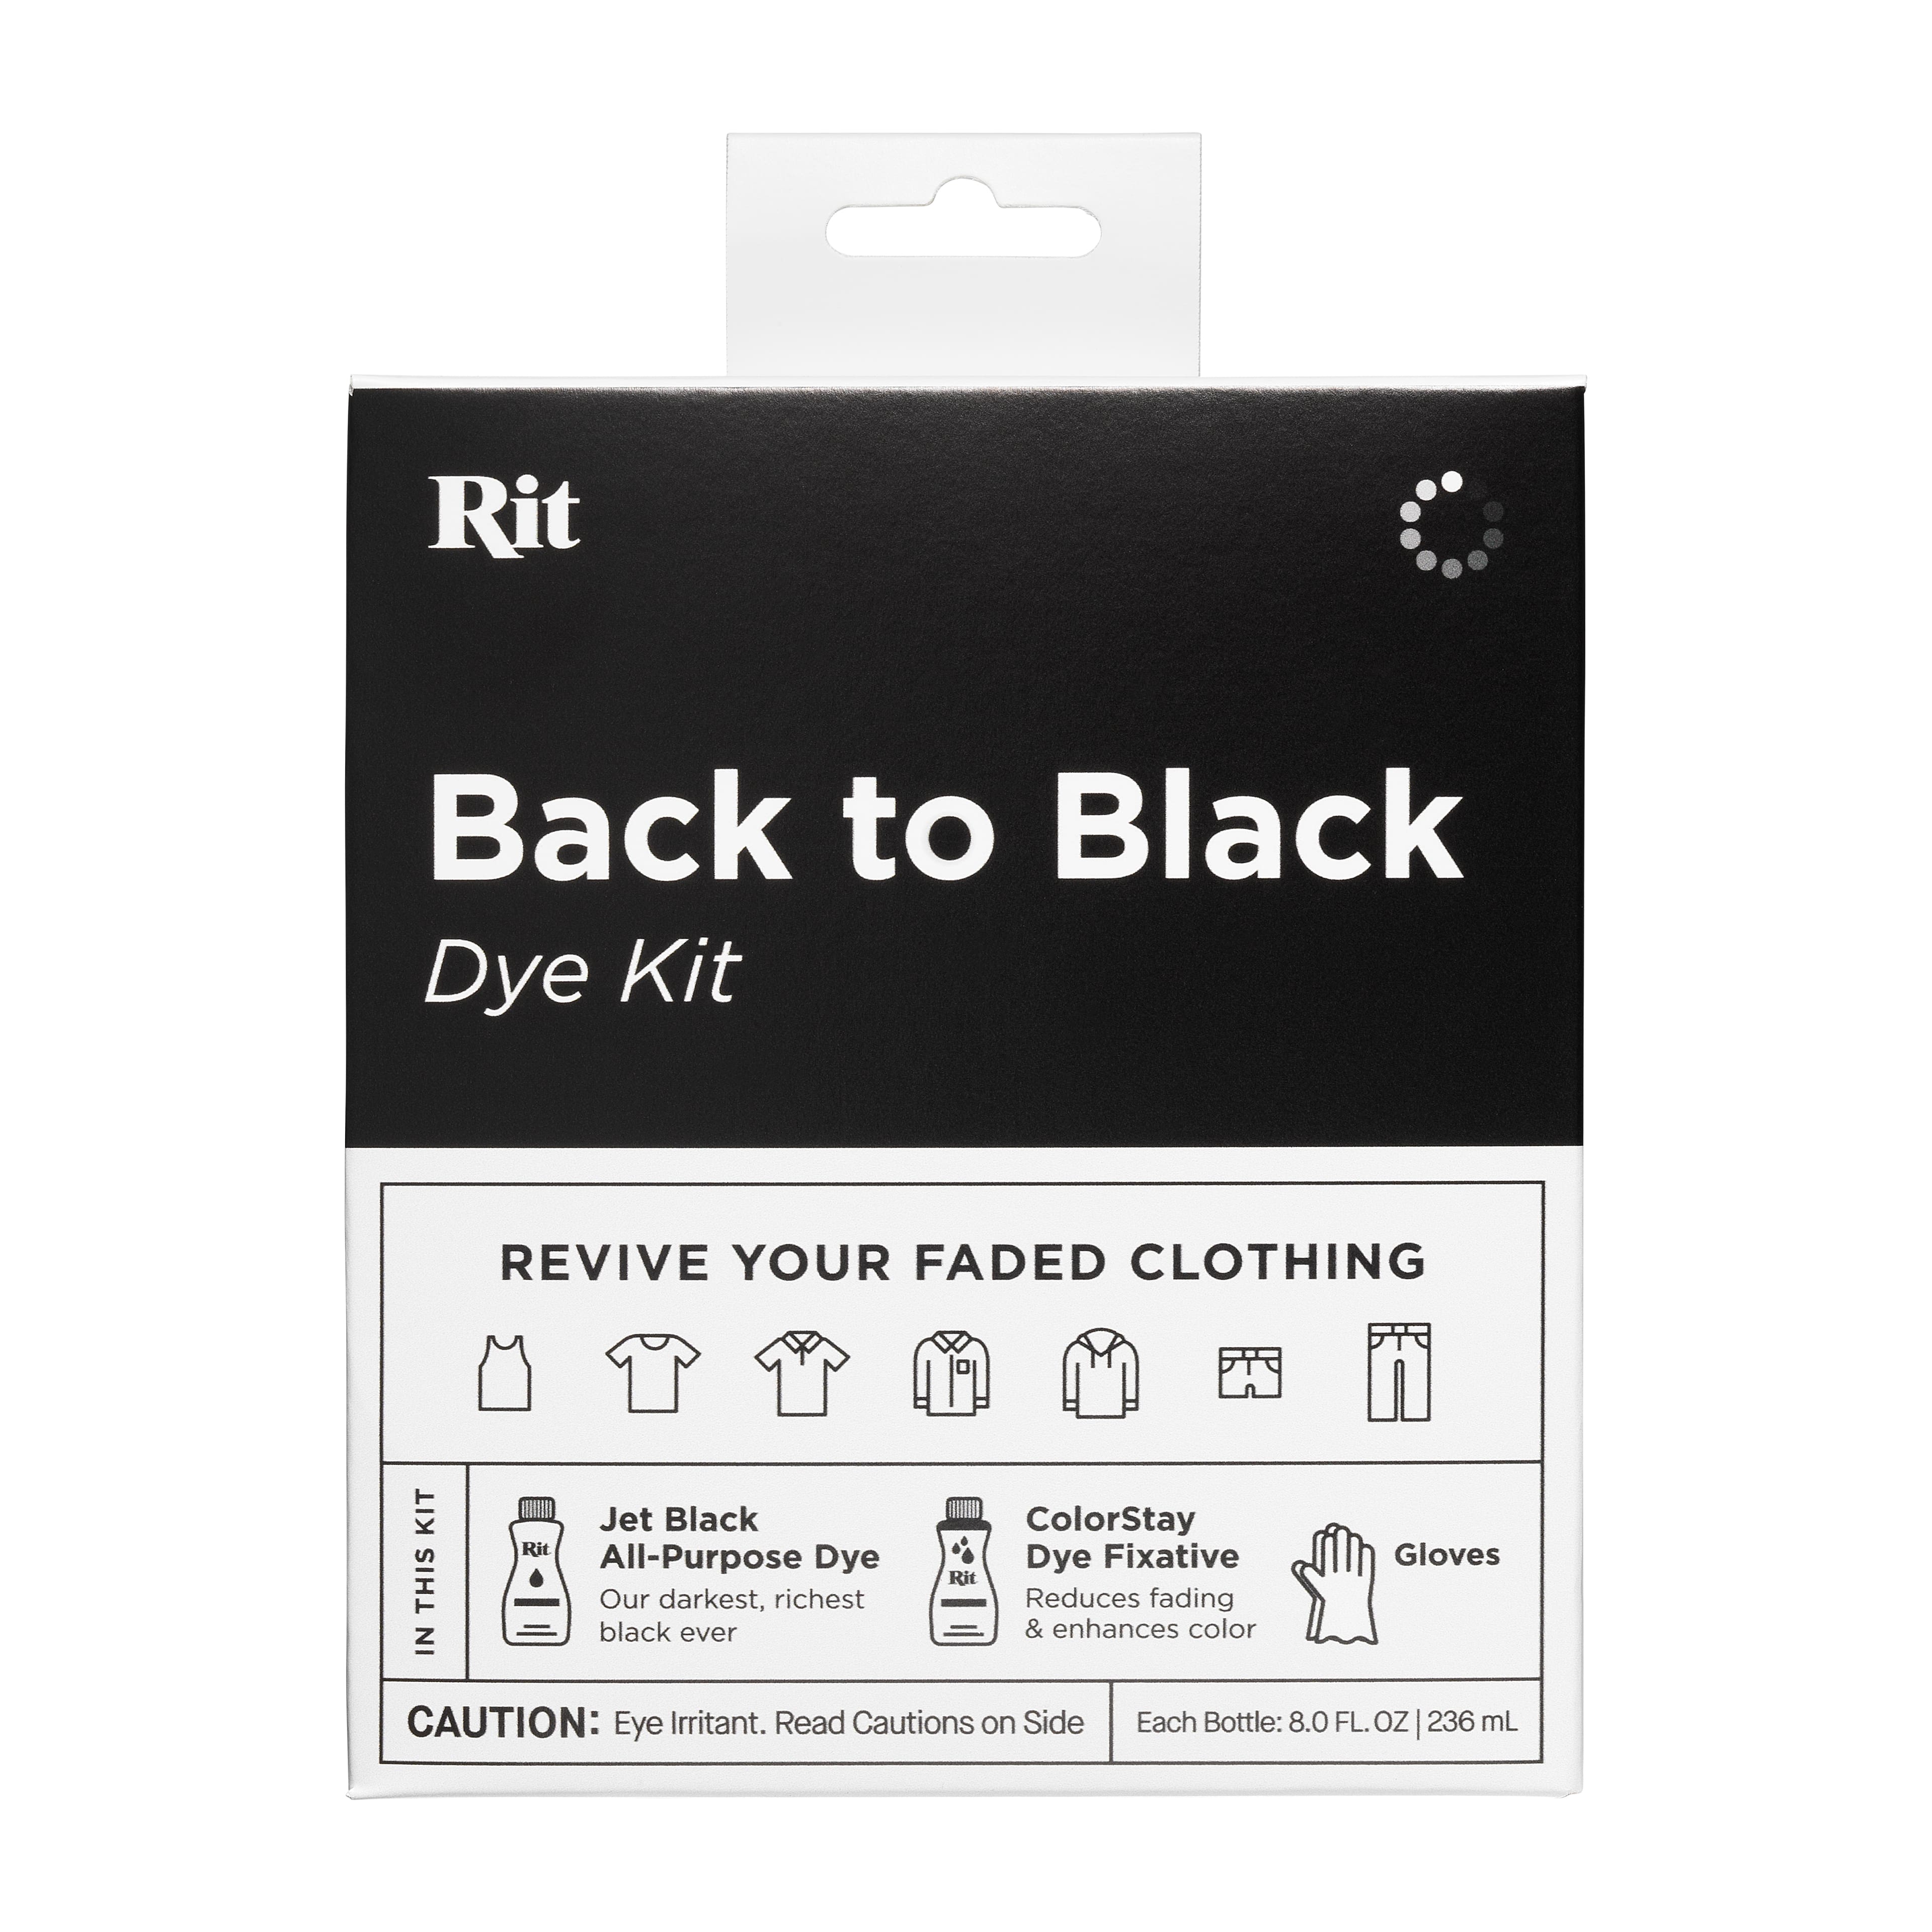 How to Refresh Black Clothing with Black Fabric Dye